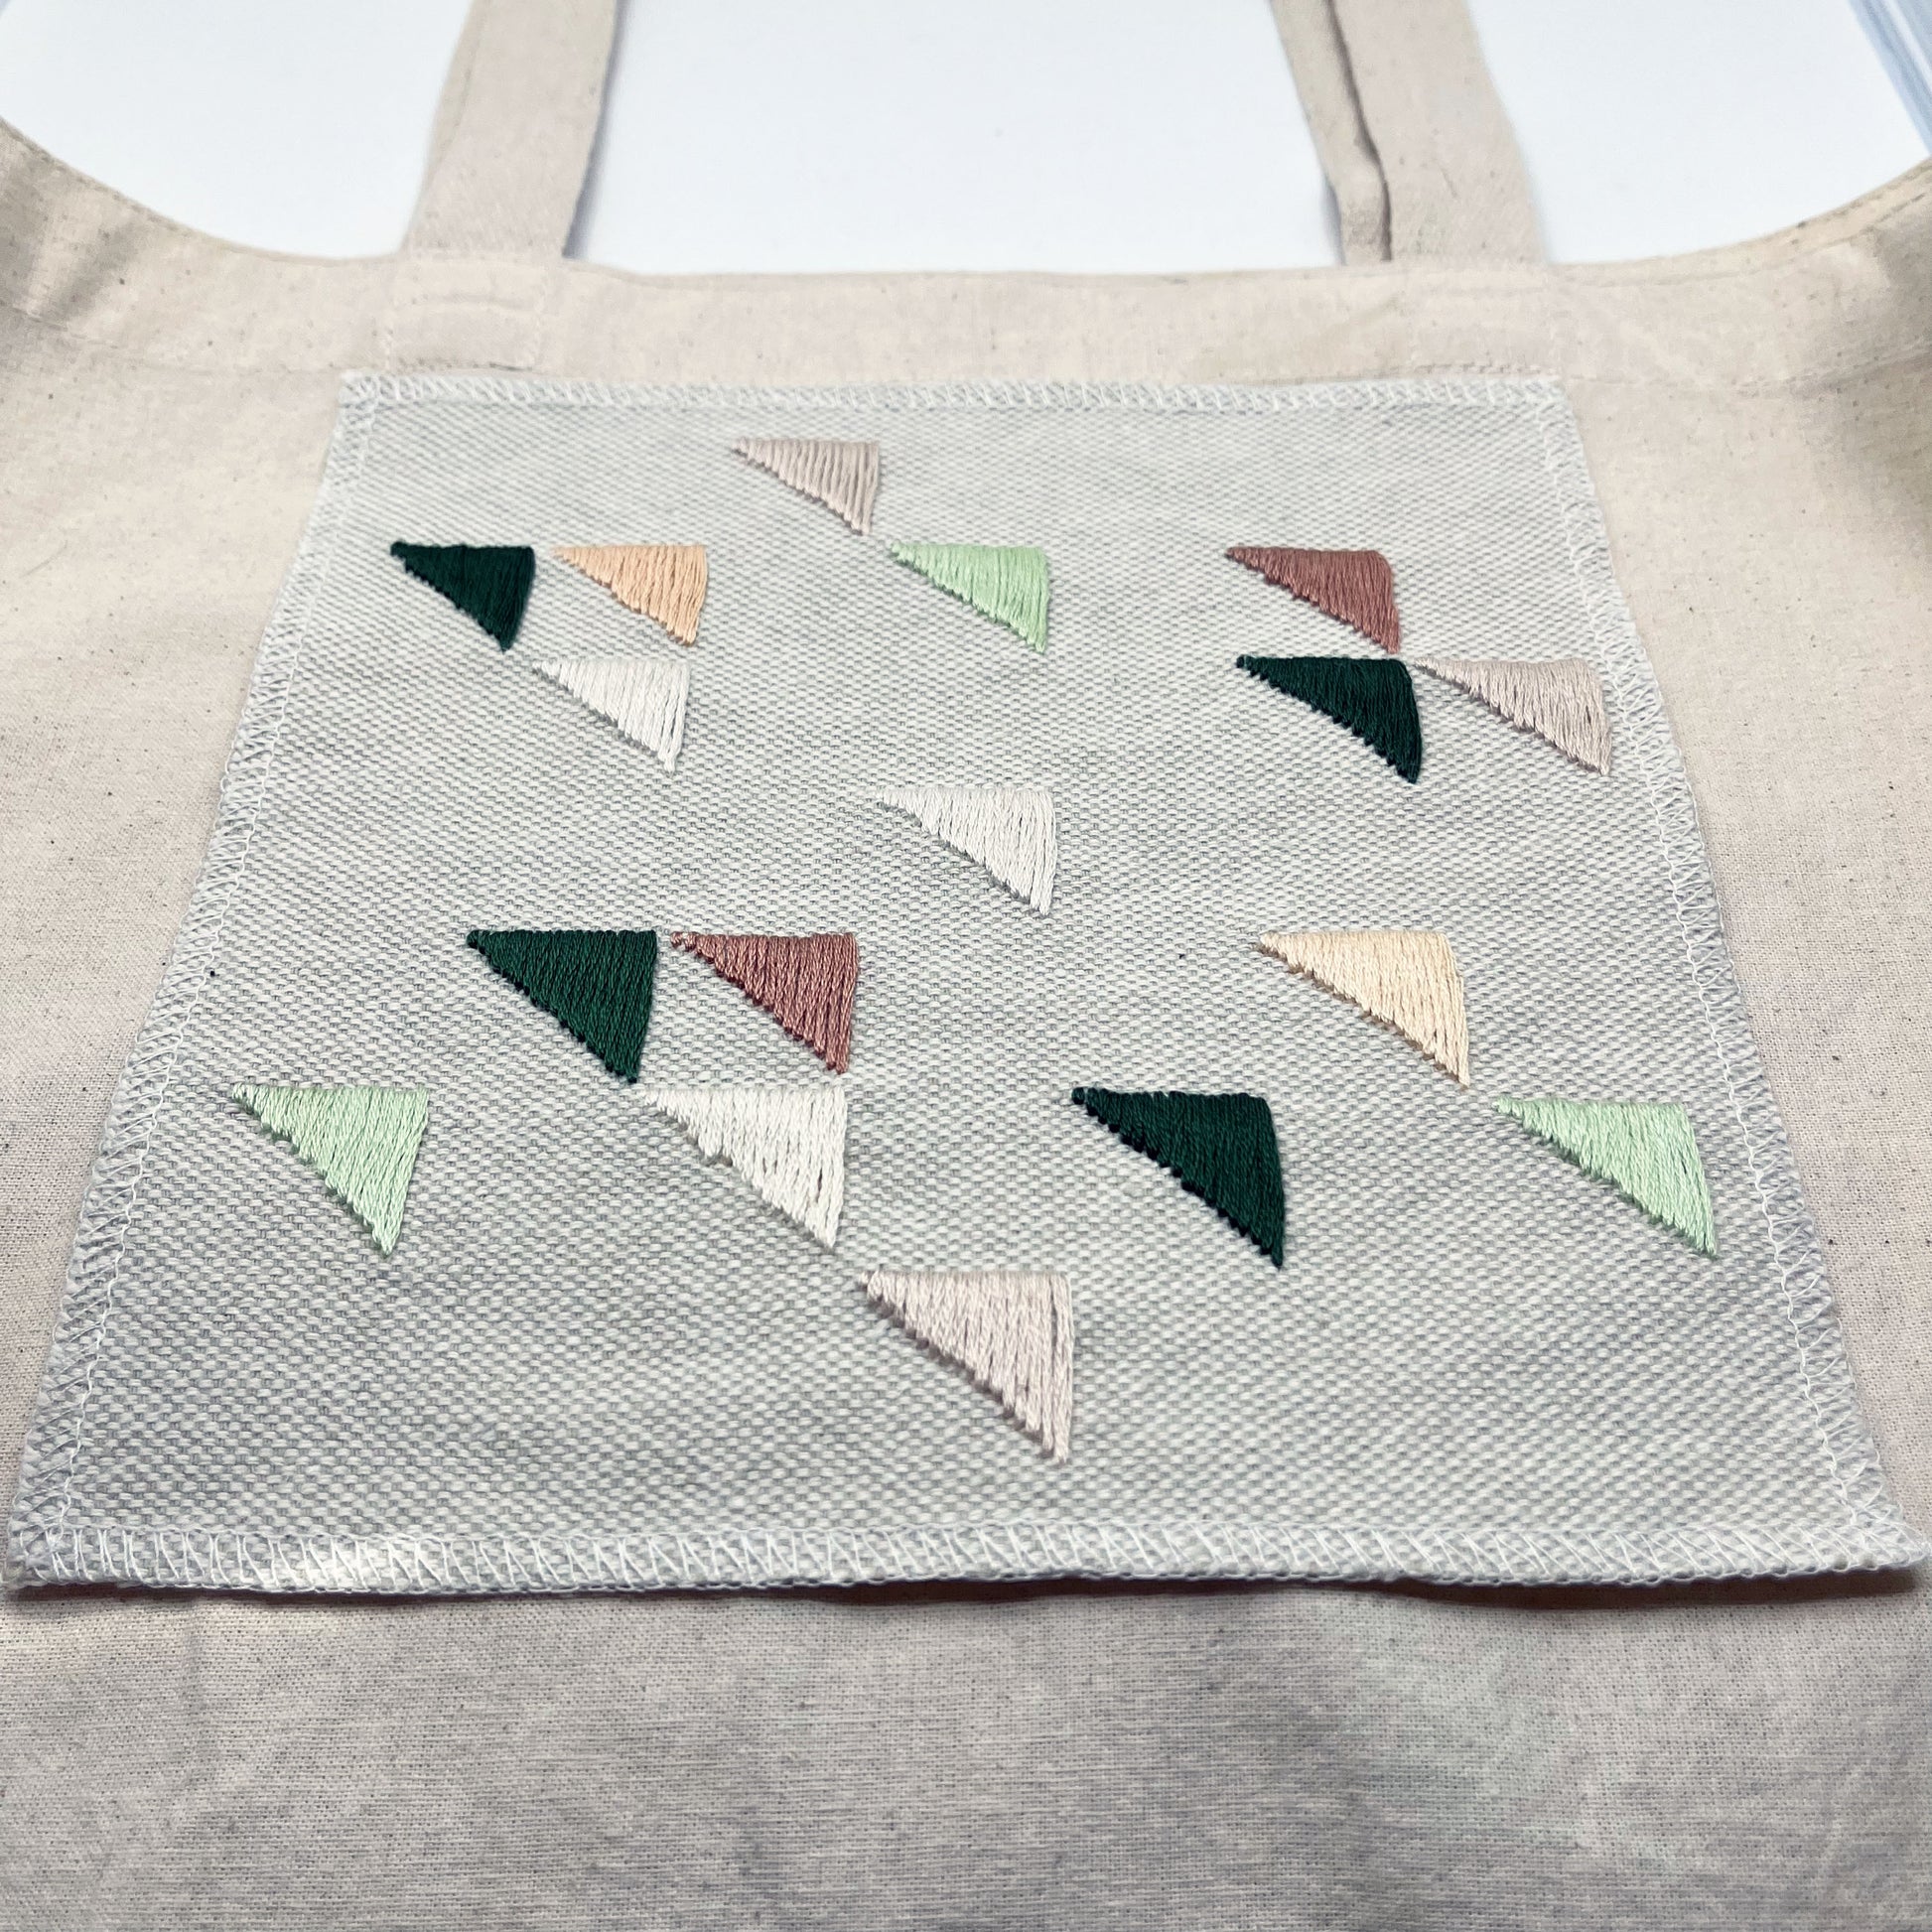 Large square natural colored patch embroidered with randomly placed triangles in peaches, mauves and greens, on a natural colored canvas tote bag